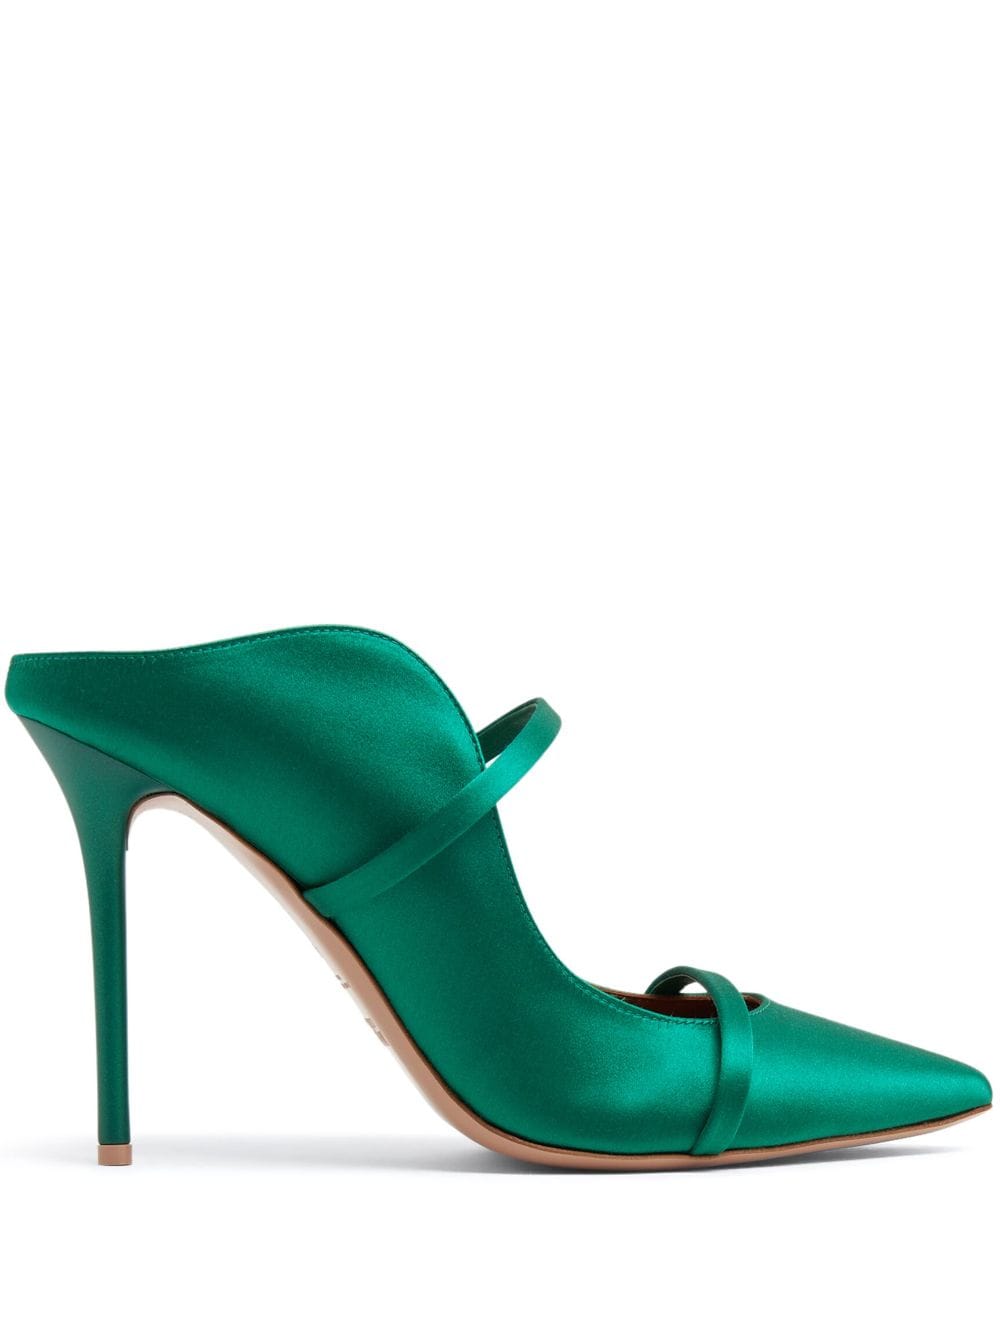 Malone Souliers Maureen 100mm Leather Pumps In Green